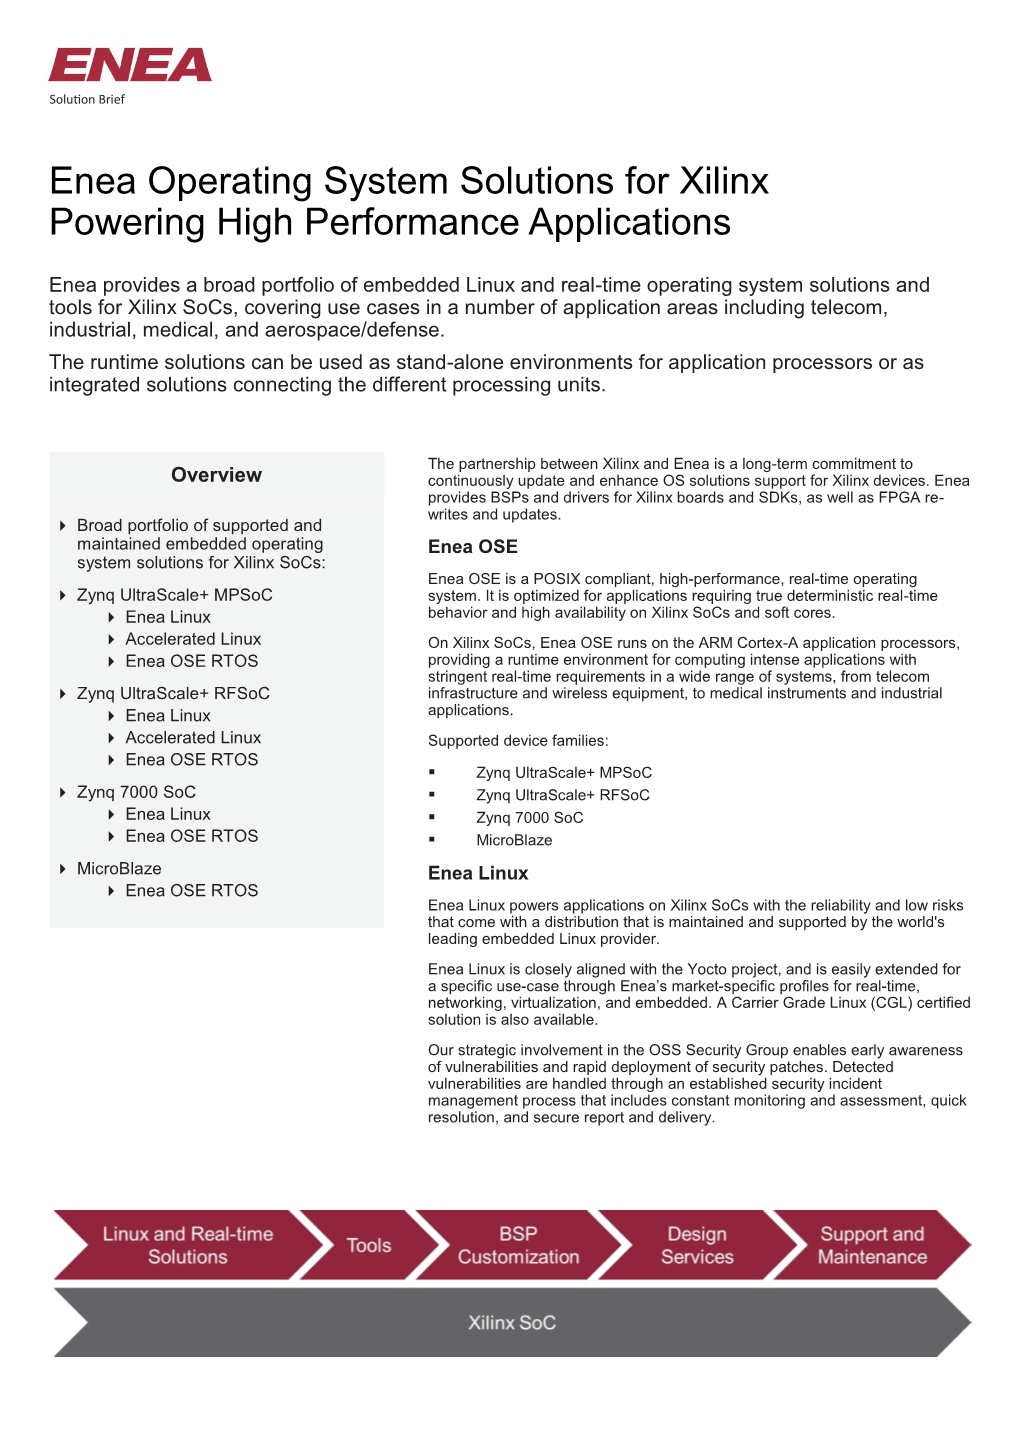 Enea Operating System Solutions for Xilinx Powering High Performance Applications